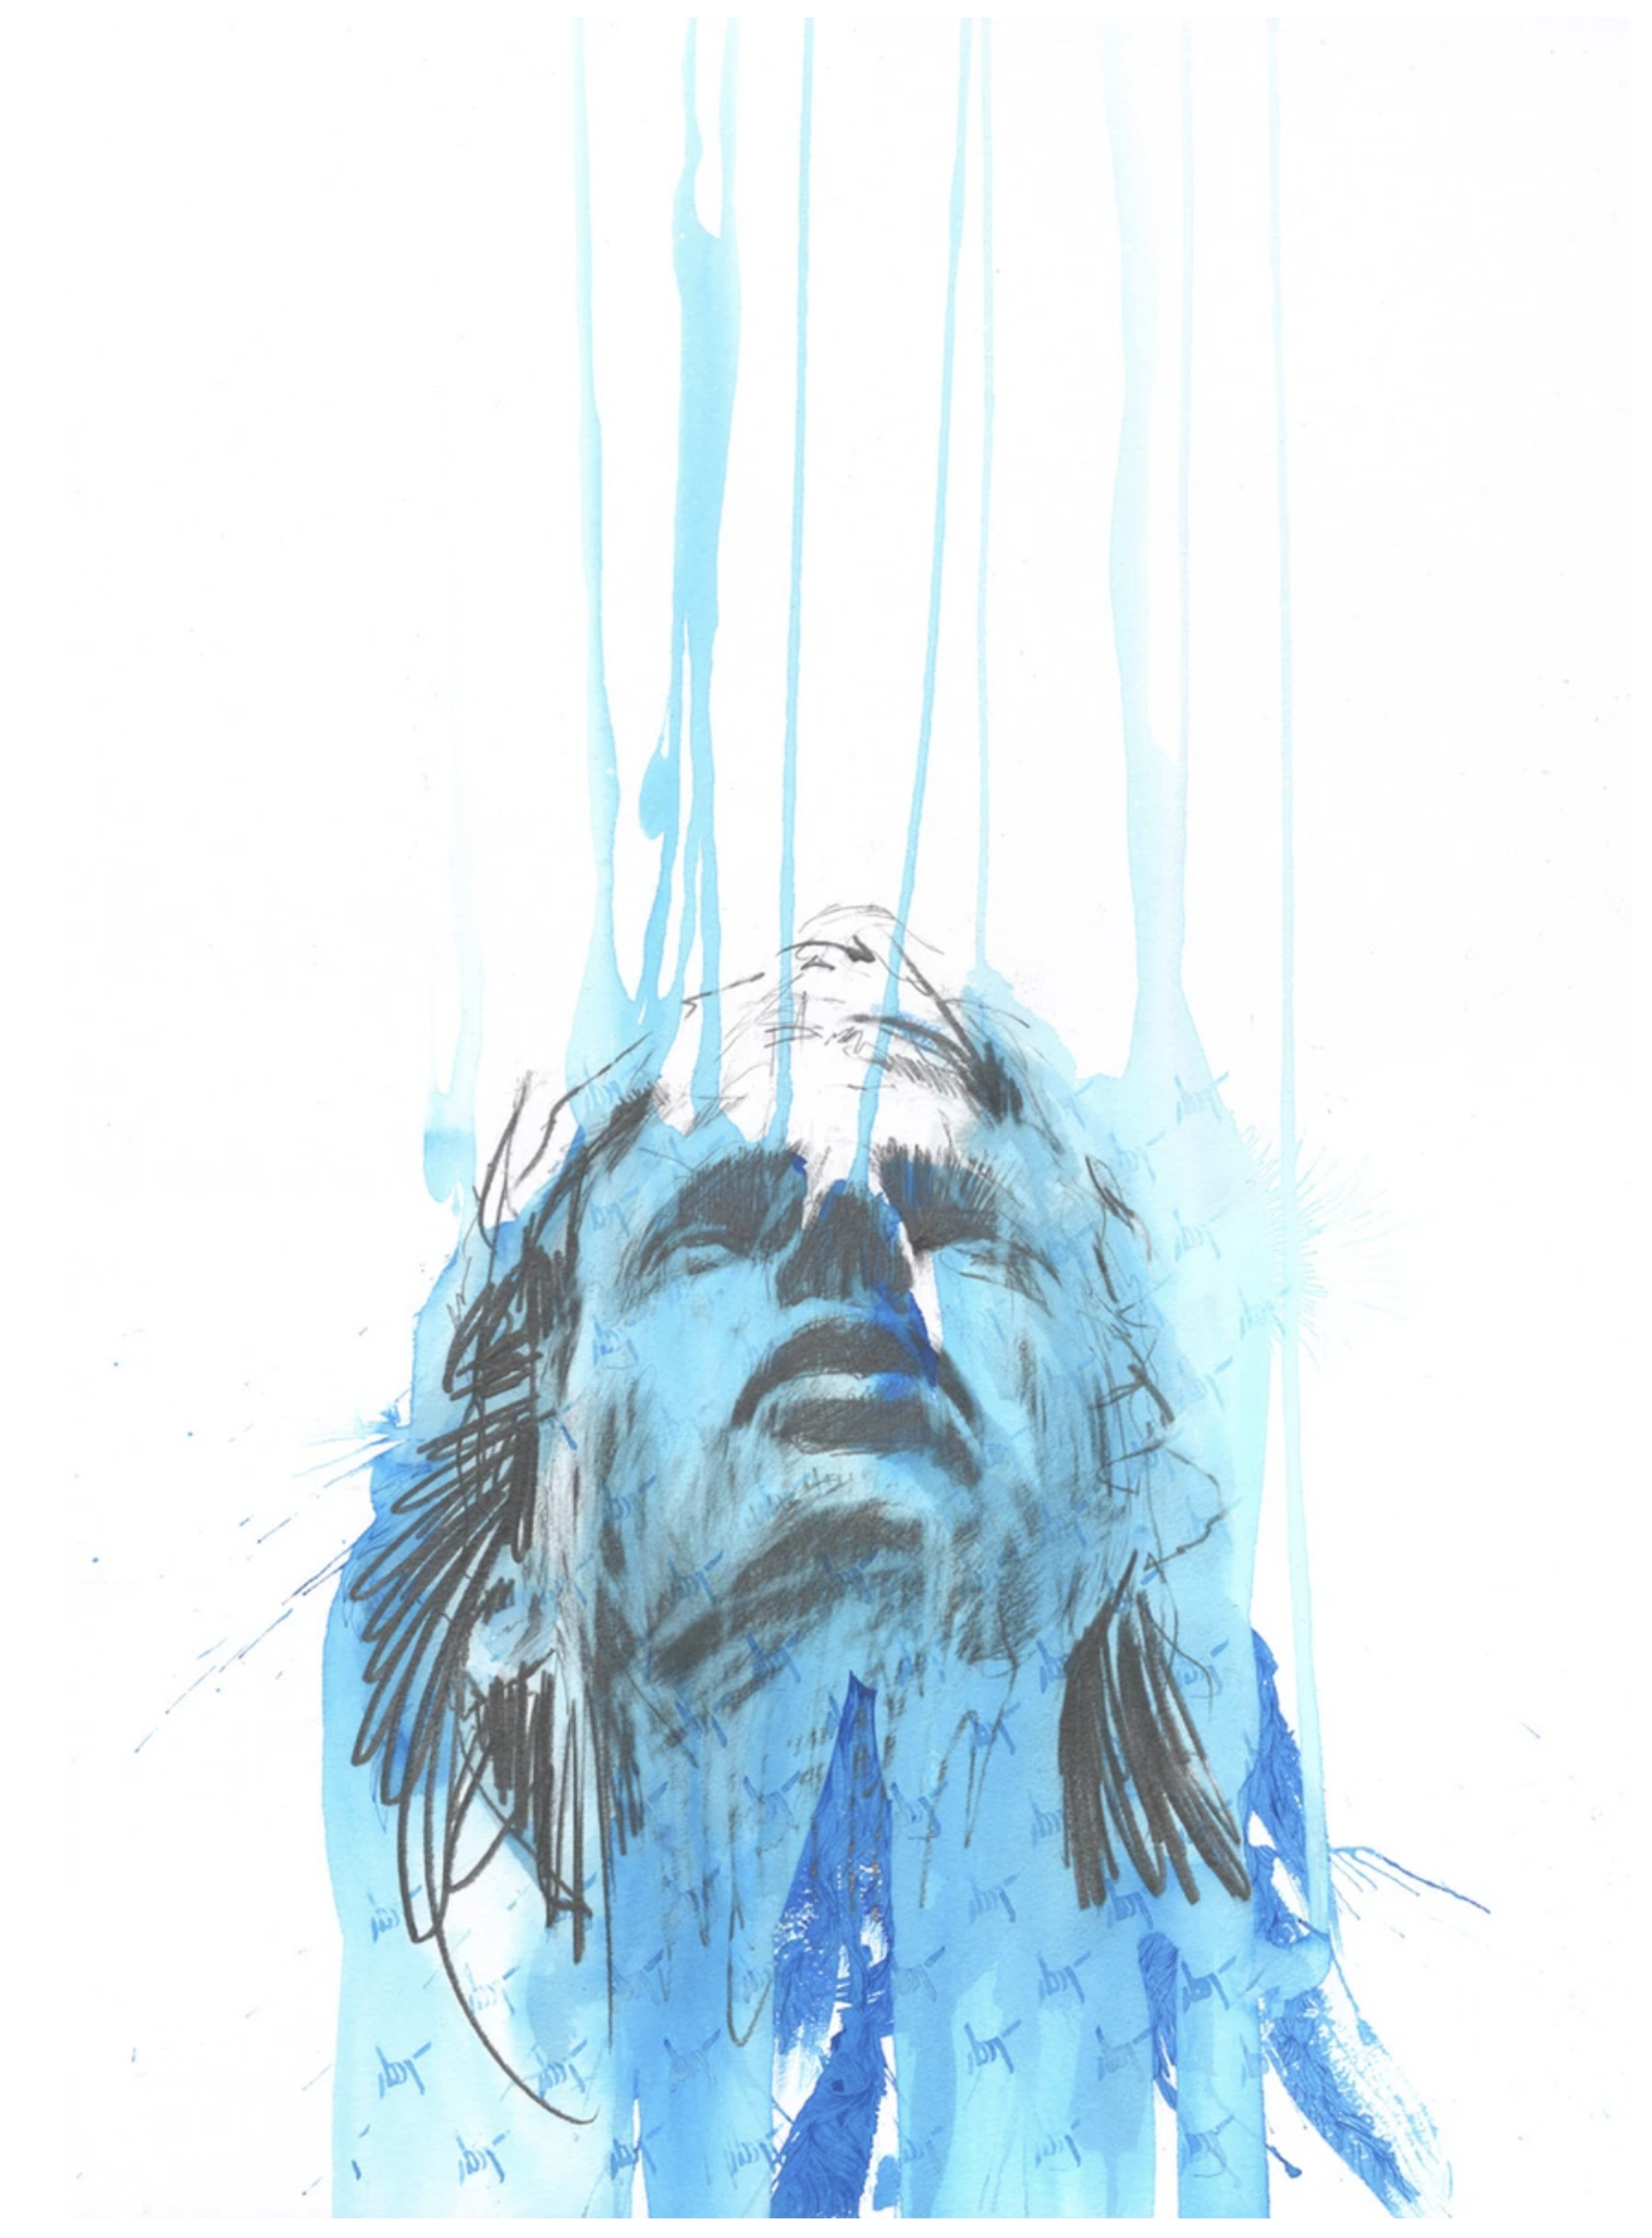 Barrier by Carne Griffiths